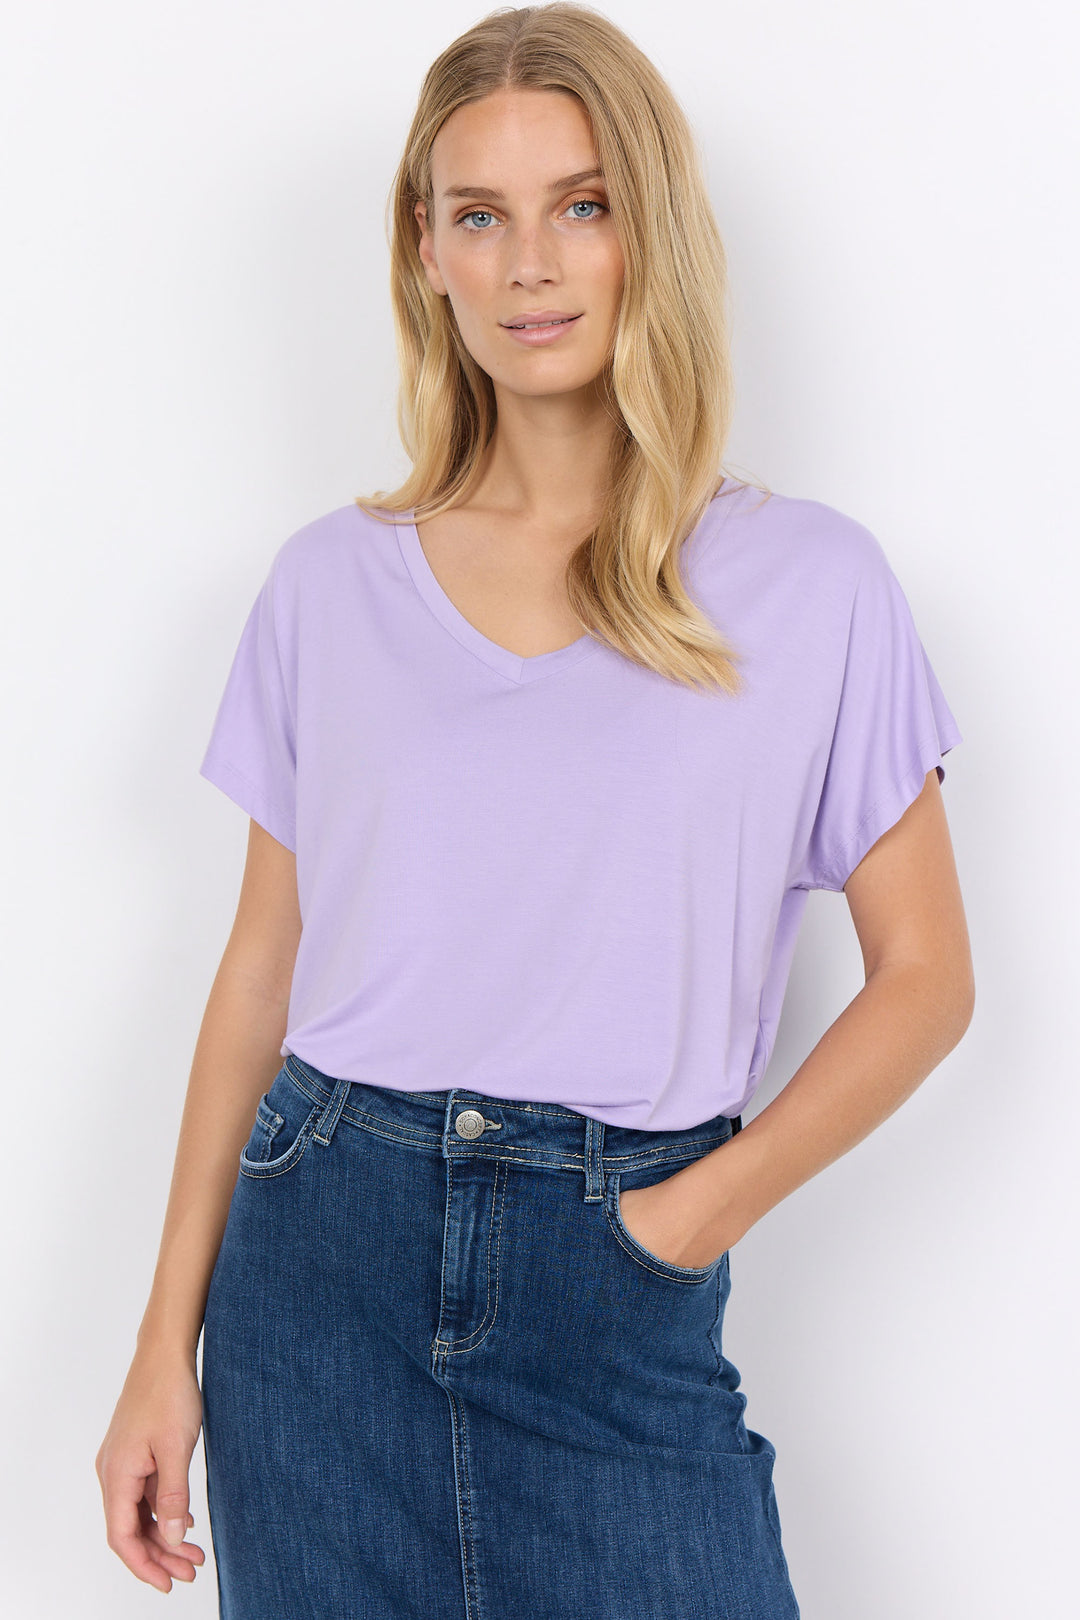 Made from soft and lightweight material, this basic t-shirt style top features a flattering v-neck. 